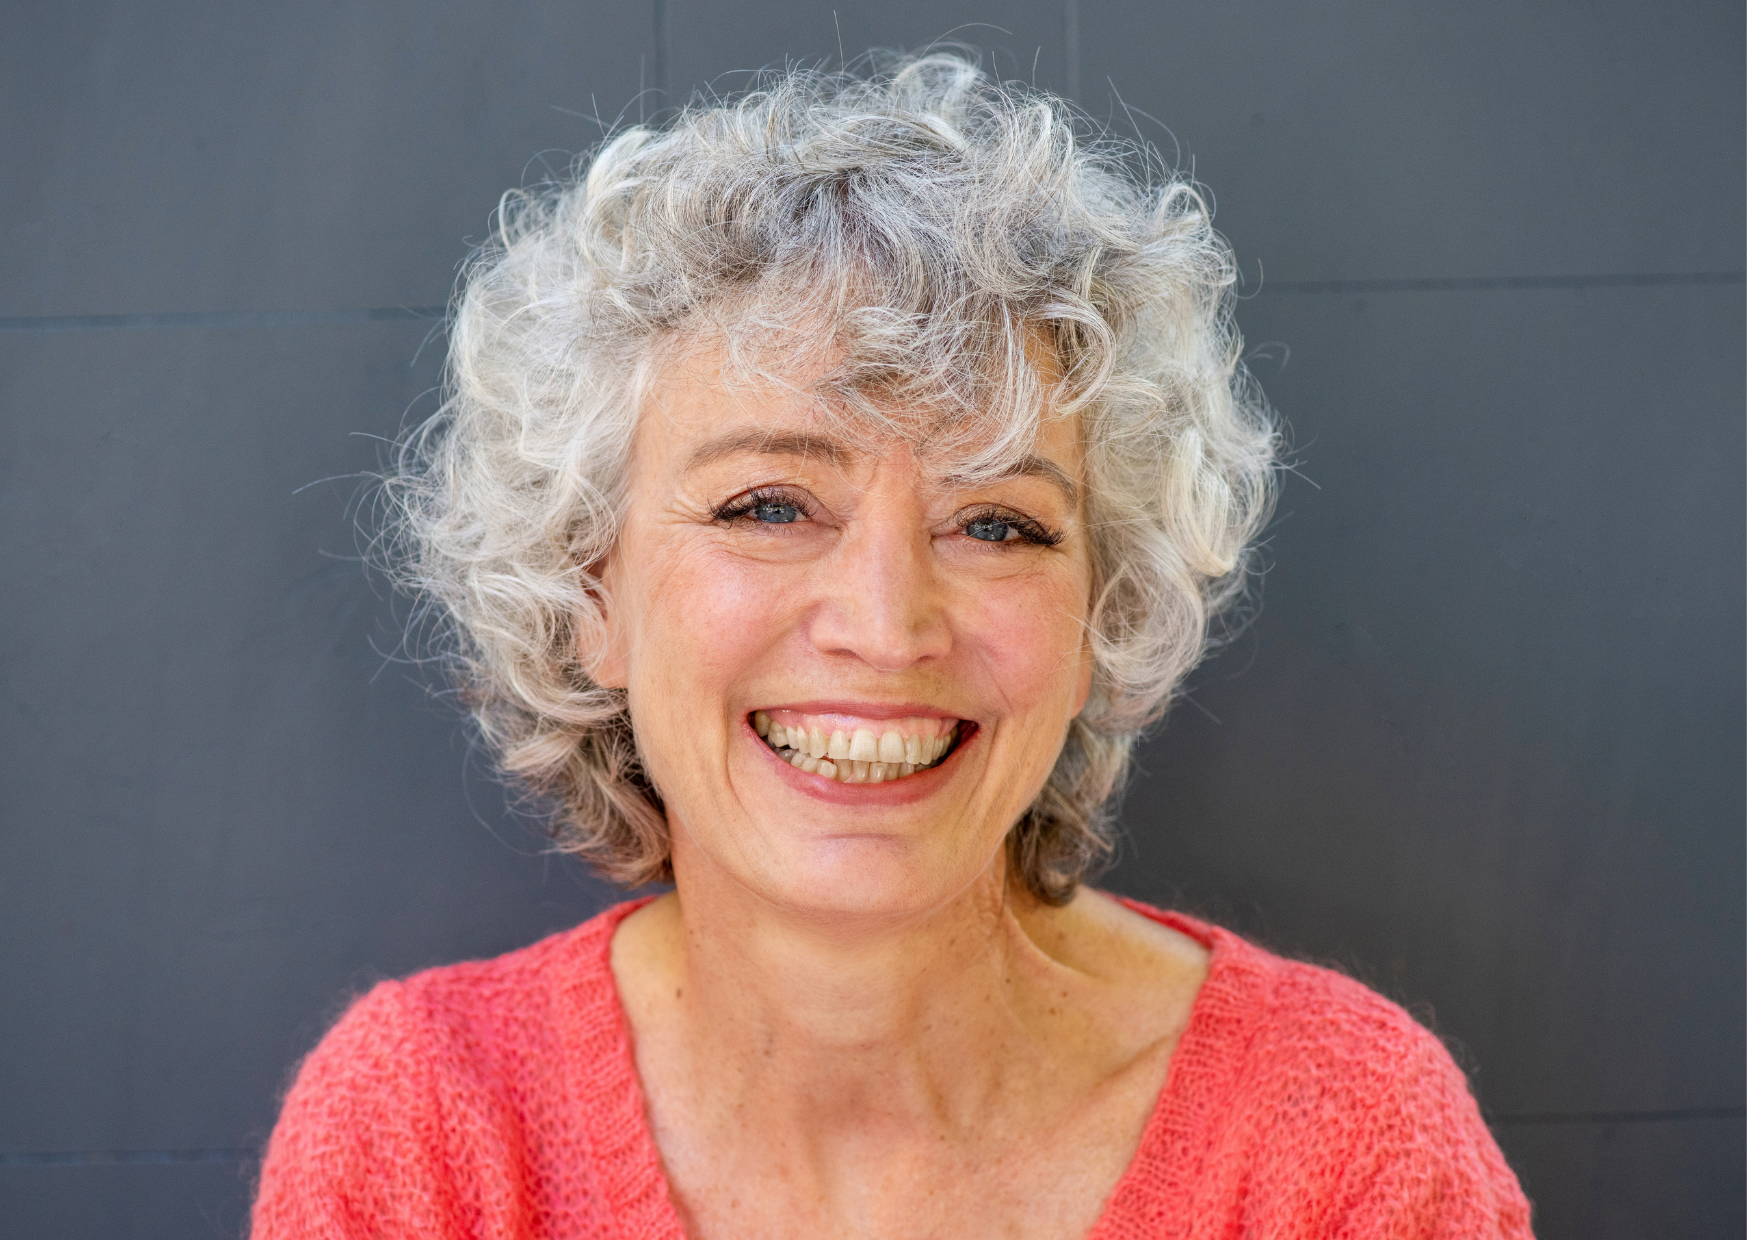 Lady with grey hair smiling